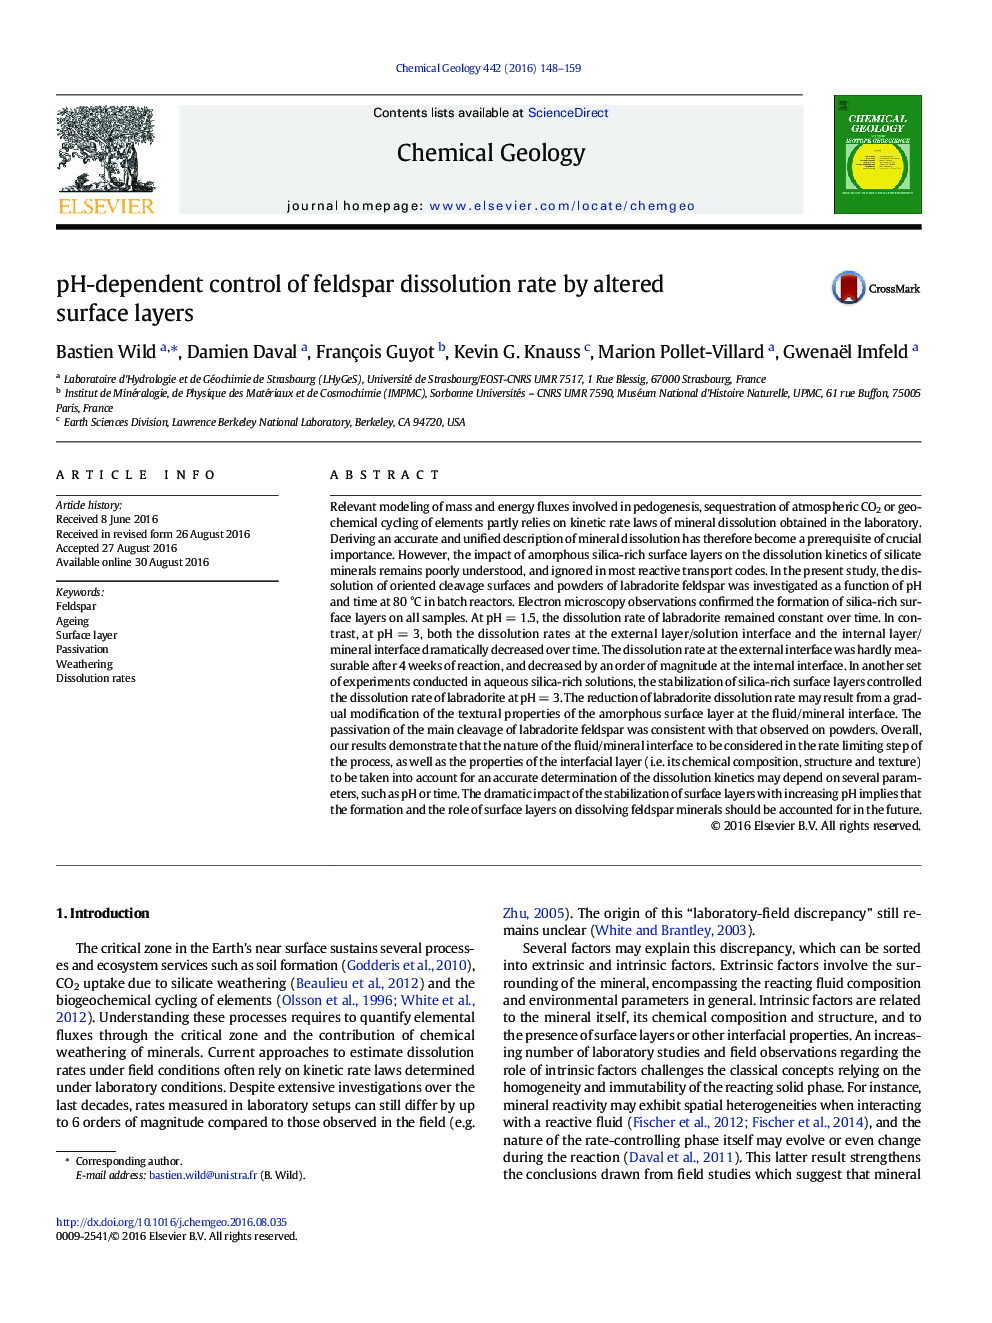 pH-dependent control of feldspar dissolution rate by altered surface layers